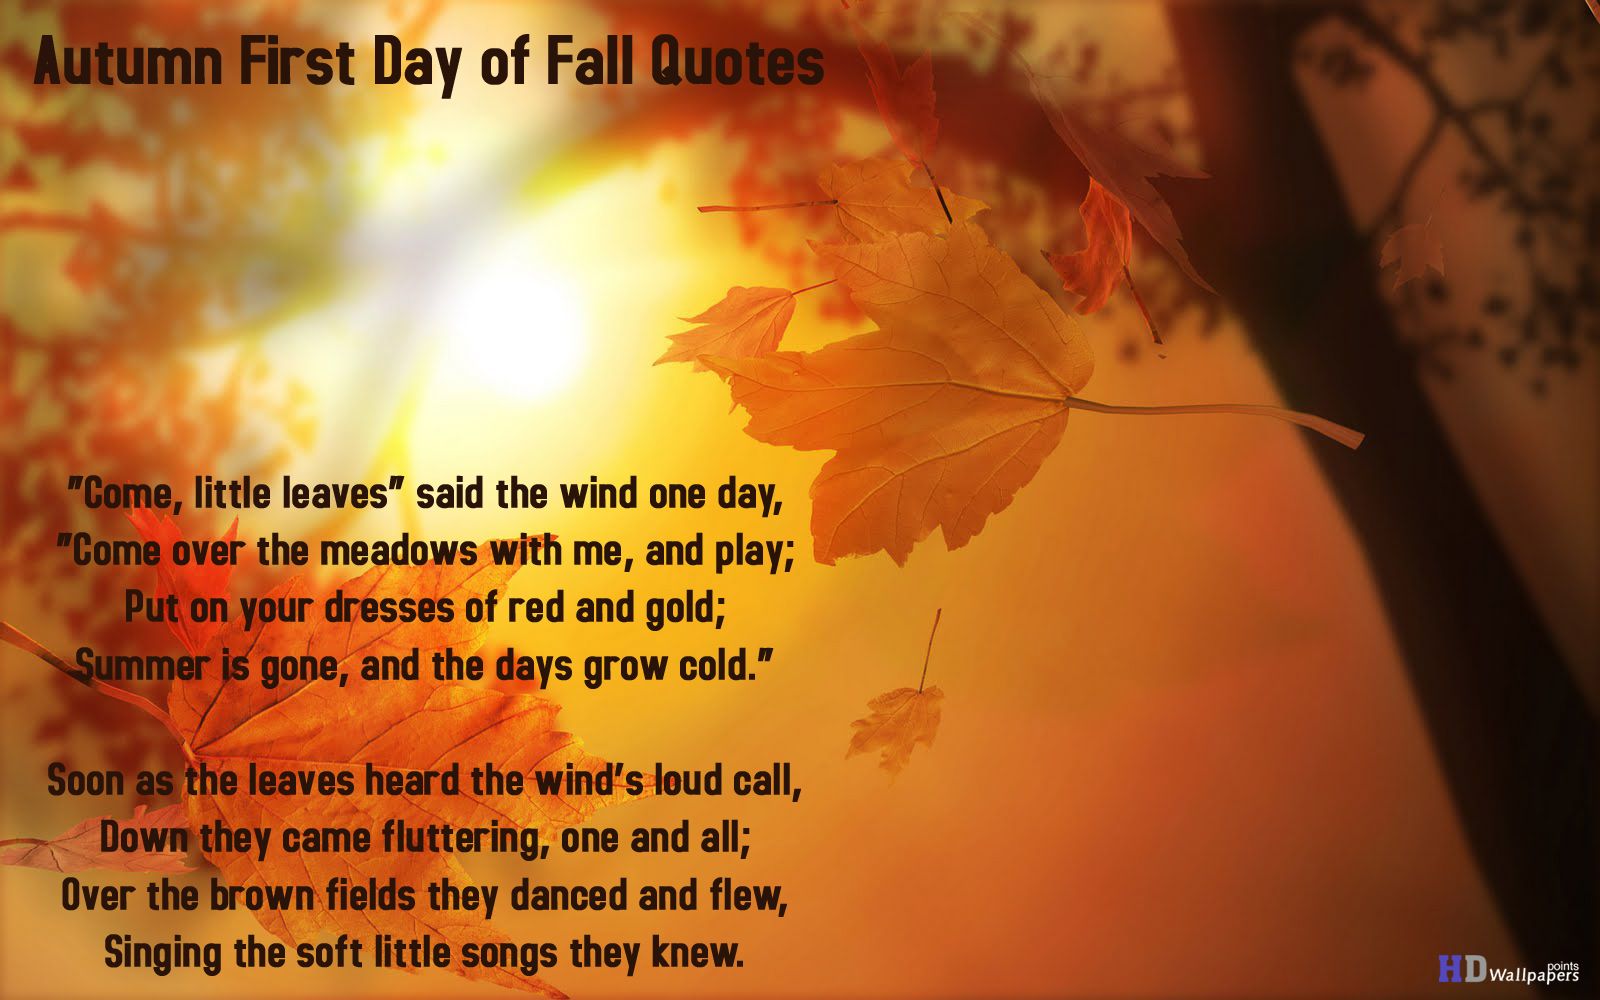 First Day of Fall Background. Holiday Wallpaper, Day of the Dead Wallpaper and Day of the Dead Skull Wallpaper